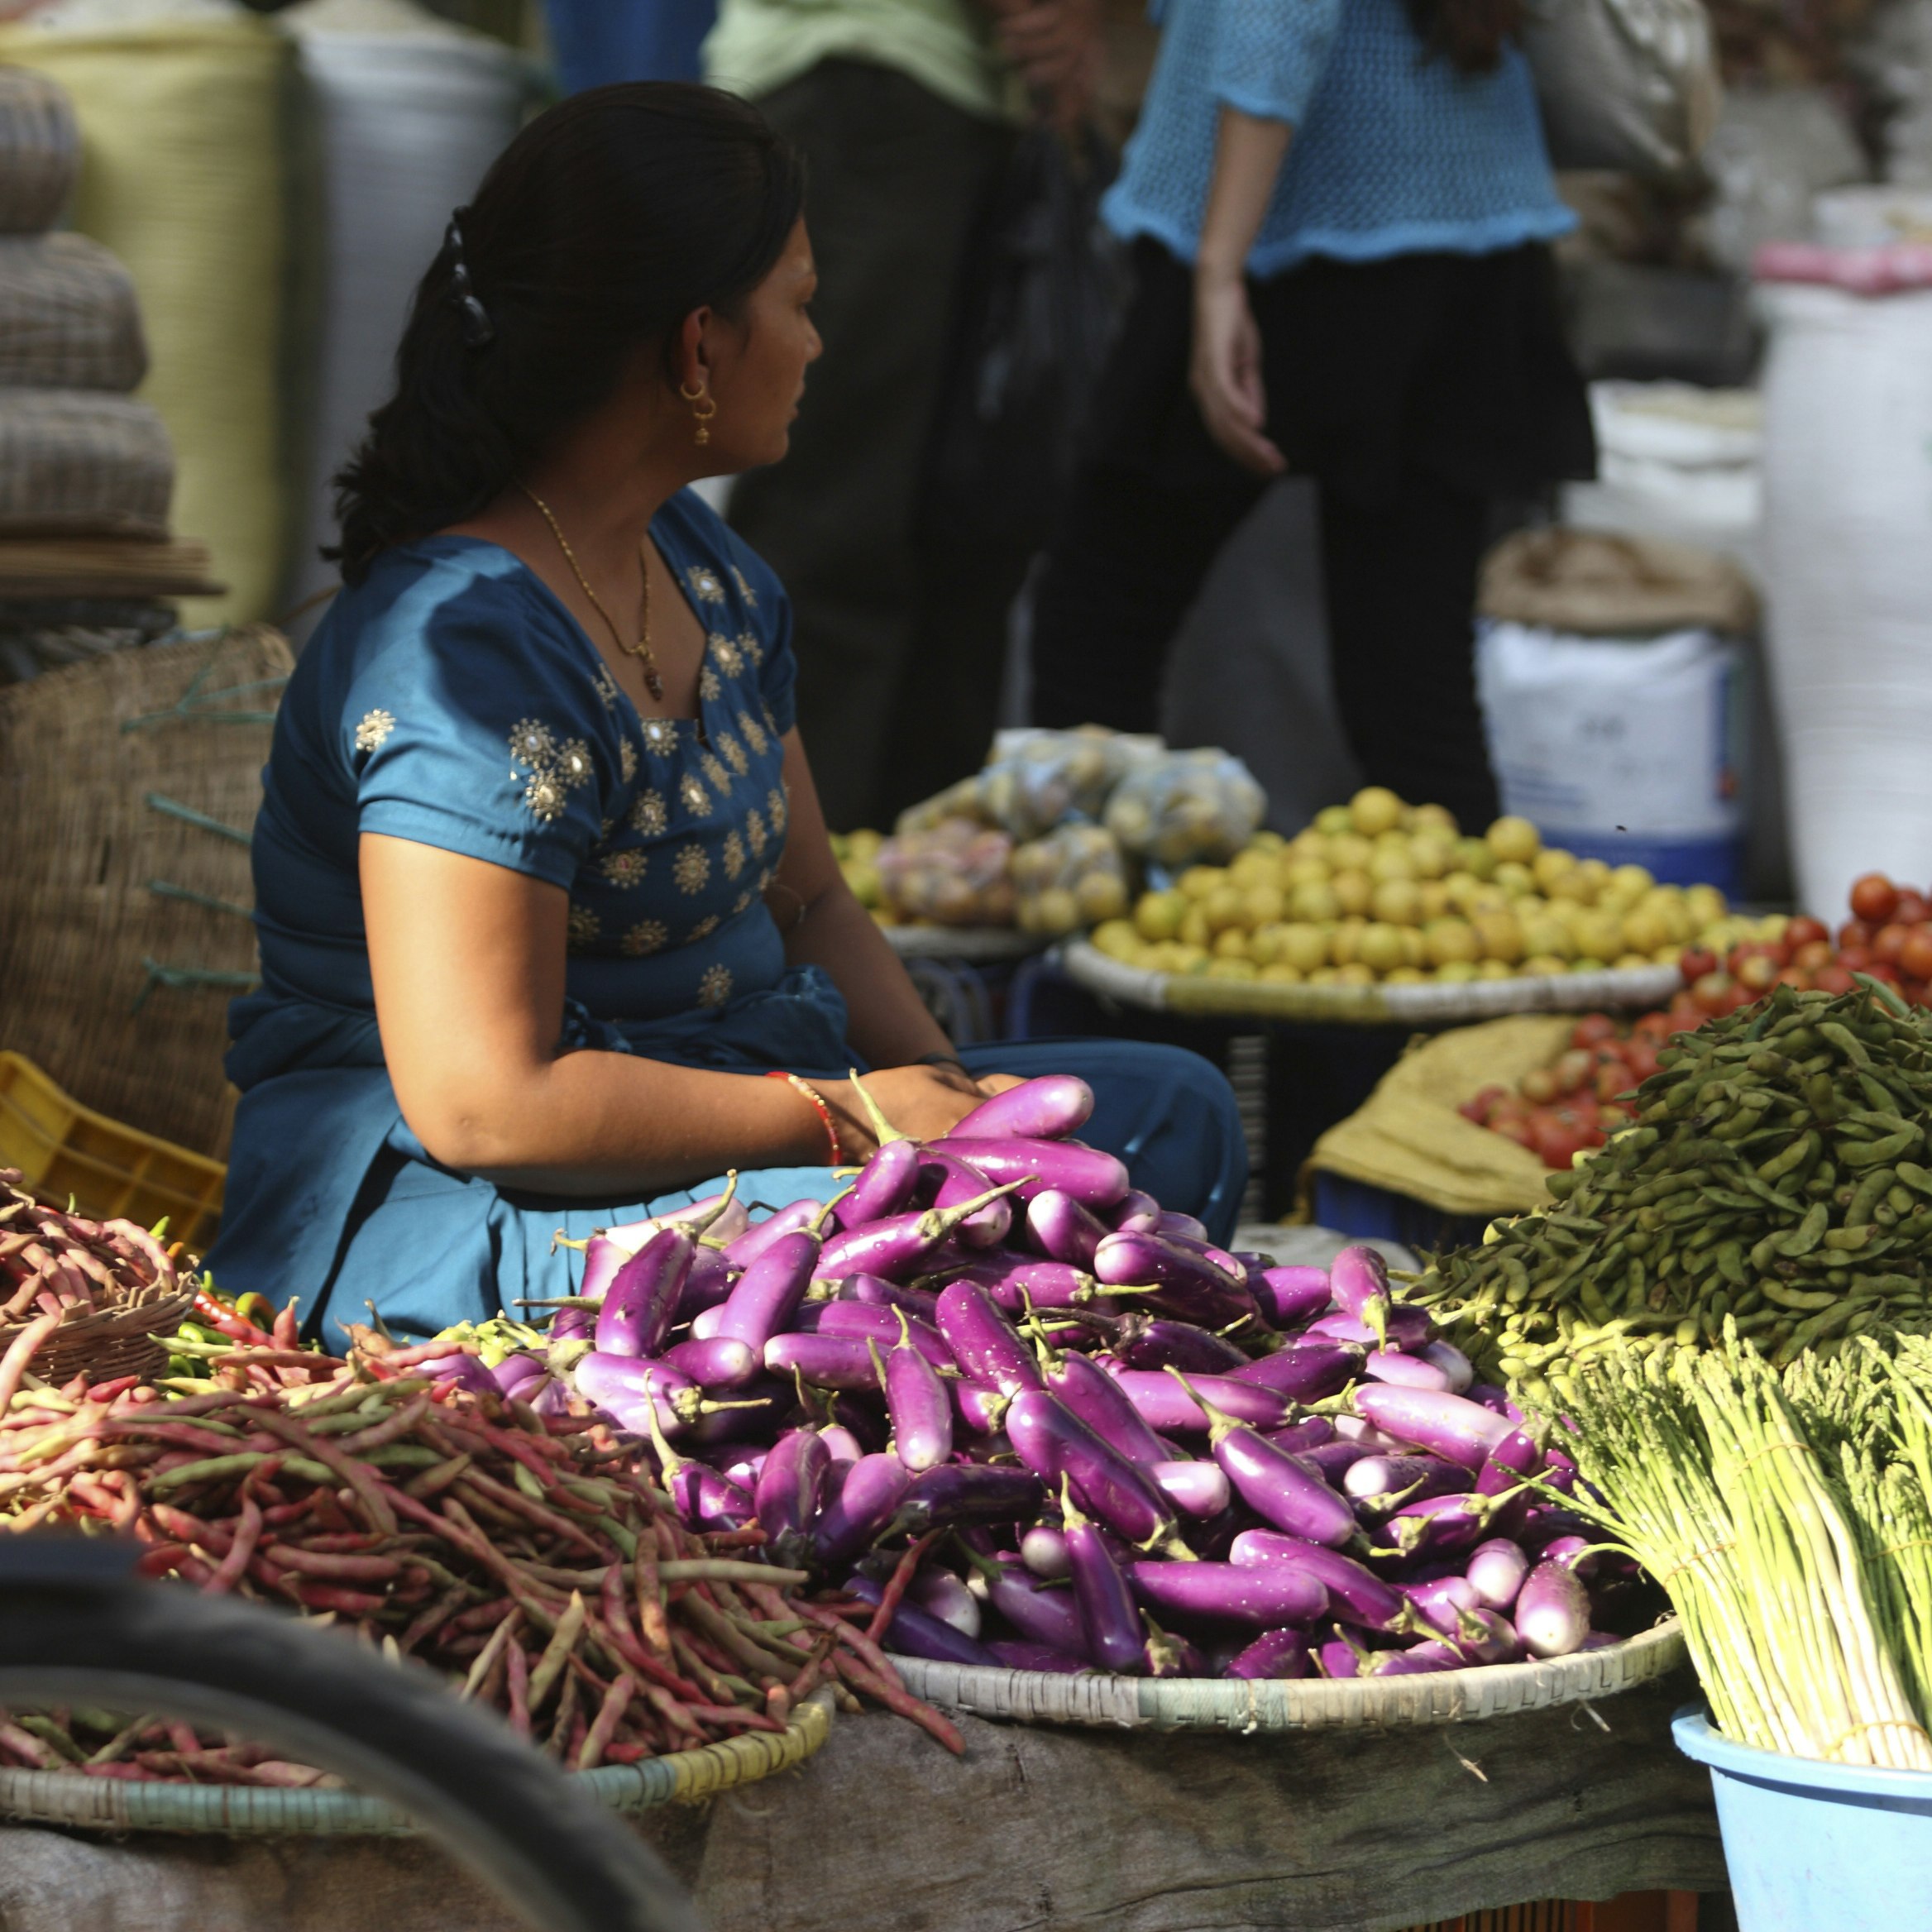 A vegetable seller, at Indra Chowk, Kathmandu. Tourism, accounted for 3.8 percent of the GDP in 1995-96, although numbers have fluctuated depending on the political situation in the country. The city's rich history is nearly 2000 years old, with Hinduism being the dominant religion followed by Buddhism. It is known as the land of the ethnic Newar community. (Newar means citizen of Nepal). Kathmandu, Nepal. 2010. (Photo by: Mahmud /Majority World/UIG via Getty Images)